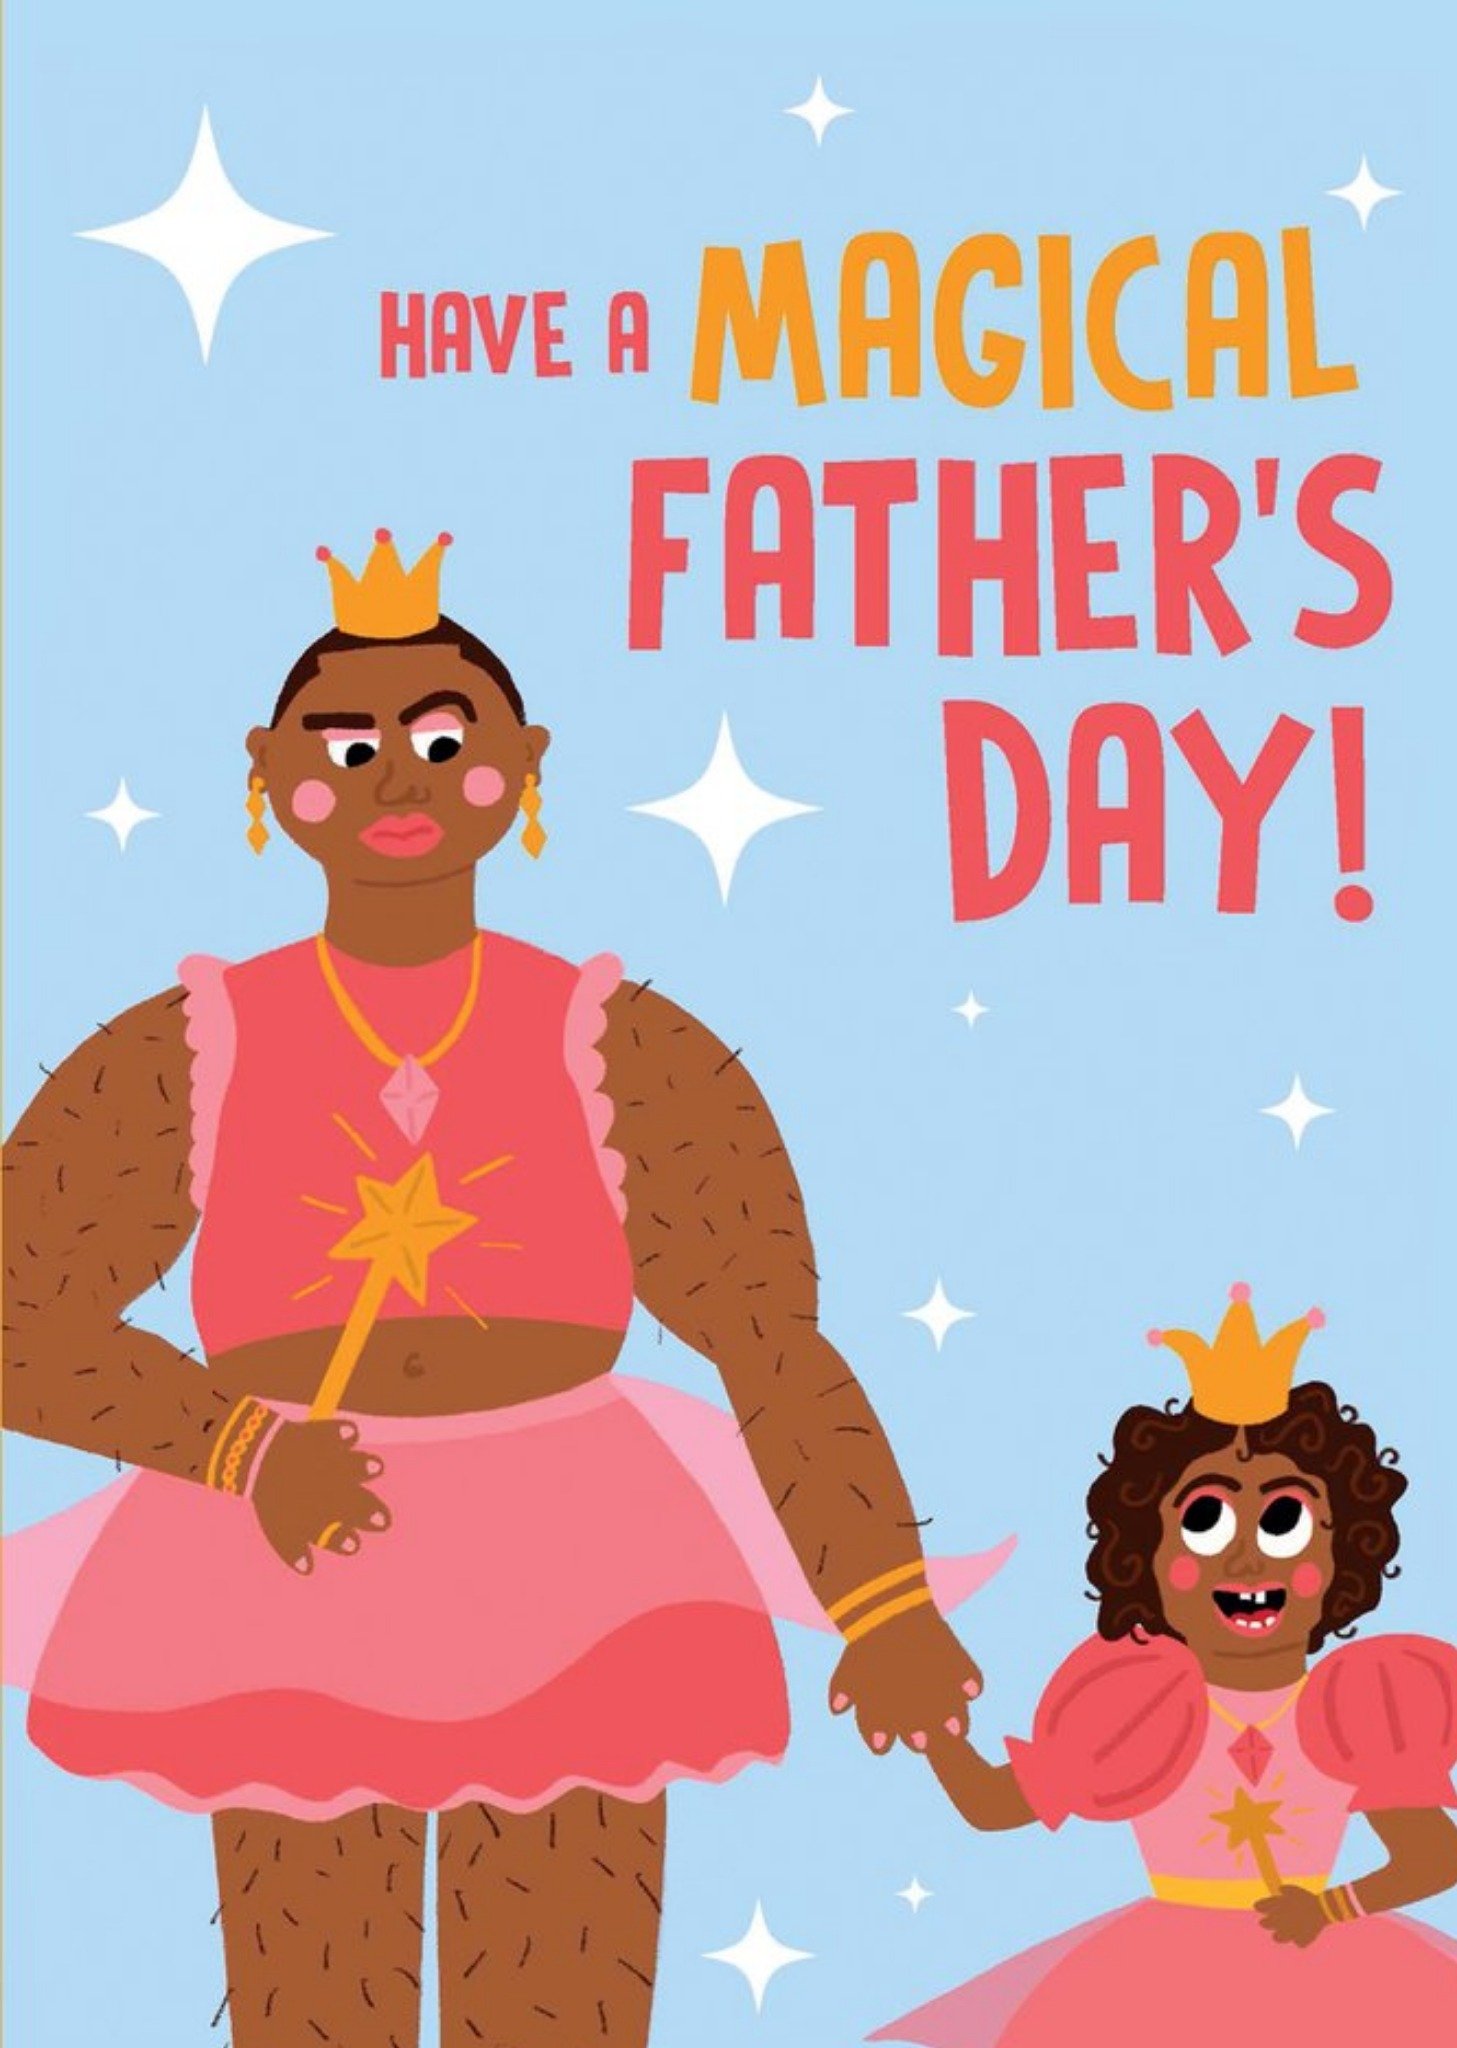 Moonpig Lucy Maggie Funny Illustration Magical Father's Day Card Ecard